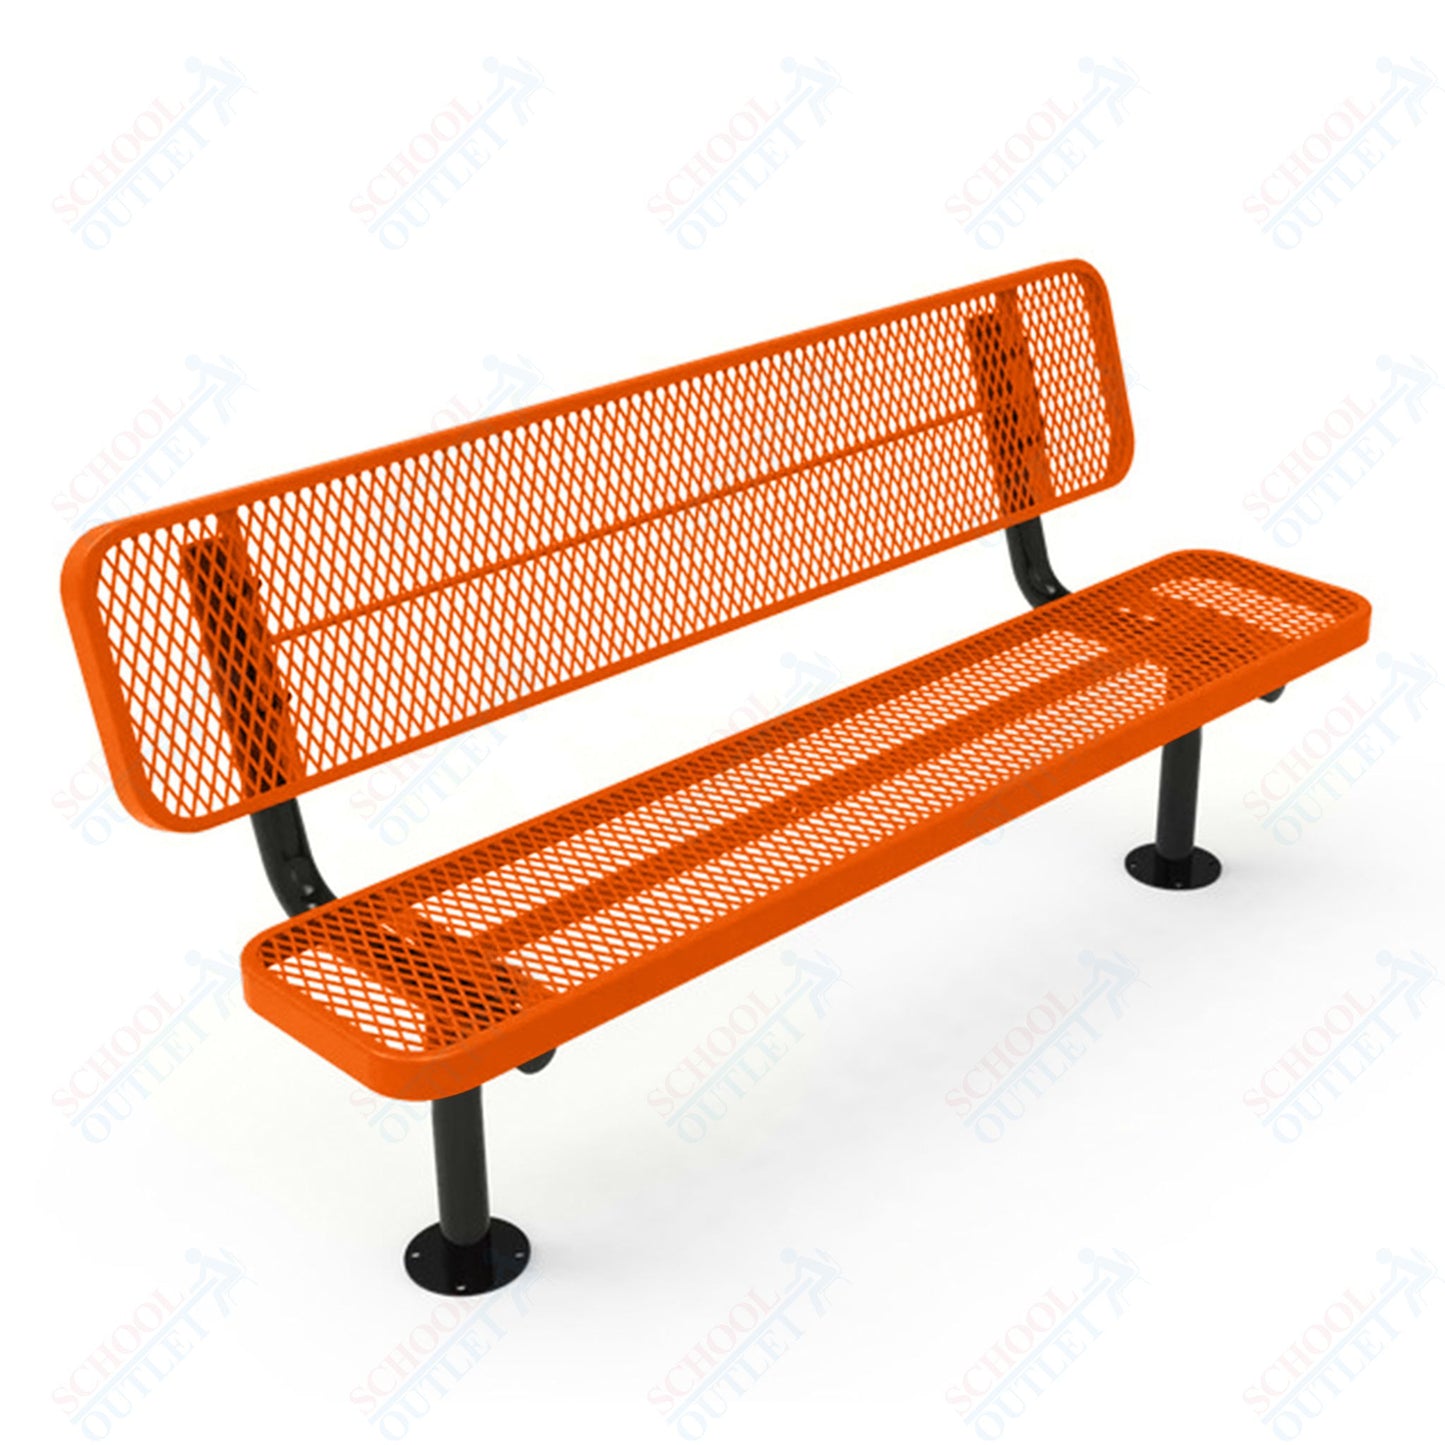 MyTcoat - Player's Outdoor Bench with Back - Surface Mount 4' L (MYT-BPY04-32)